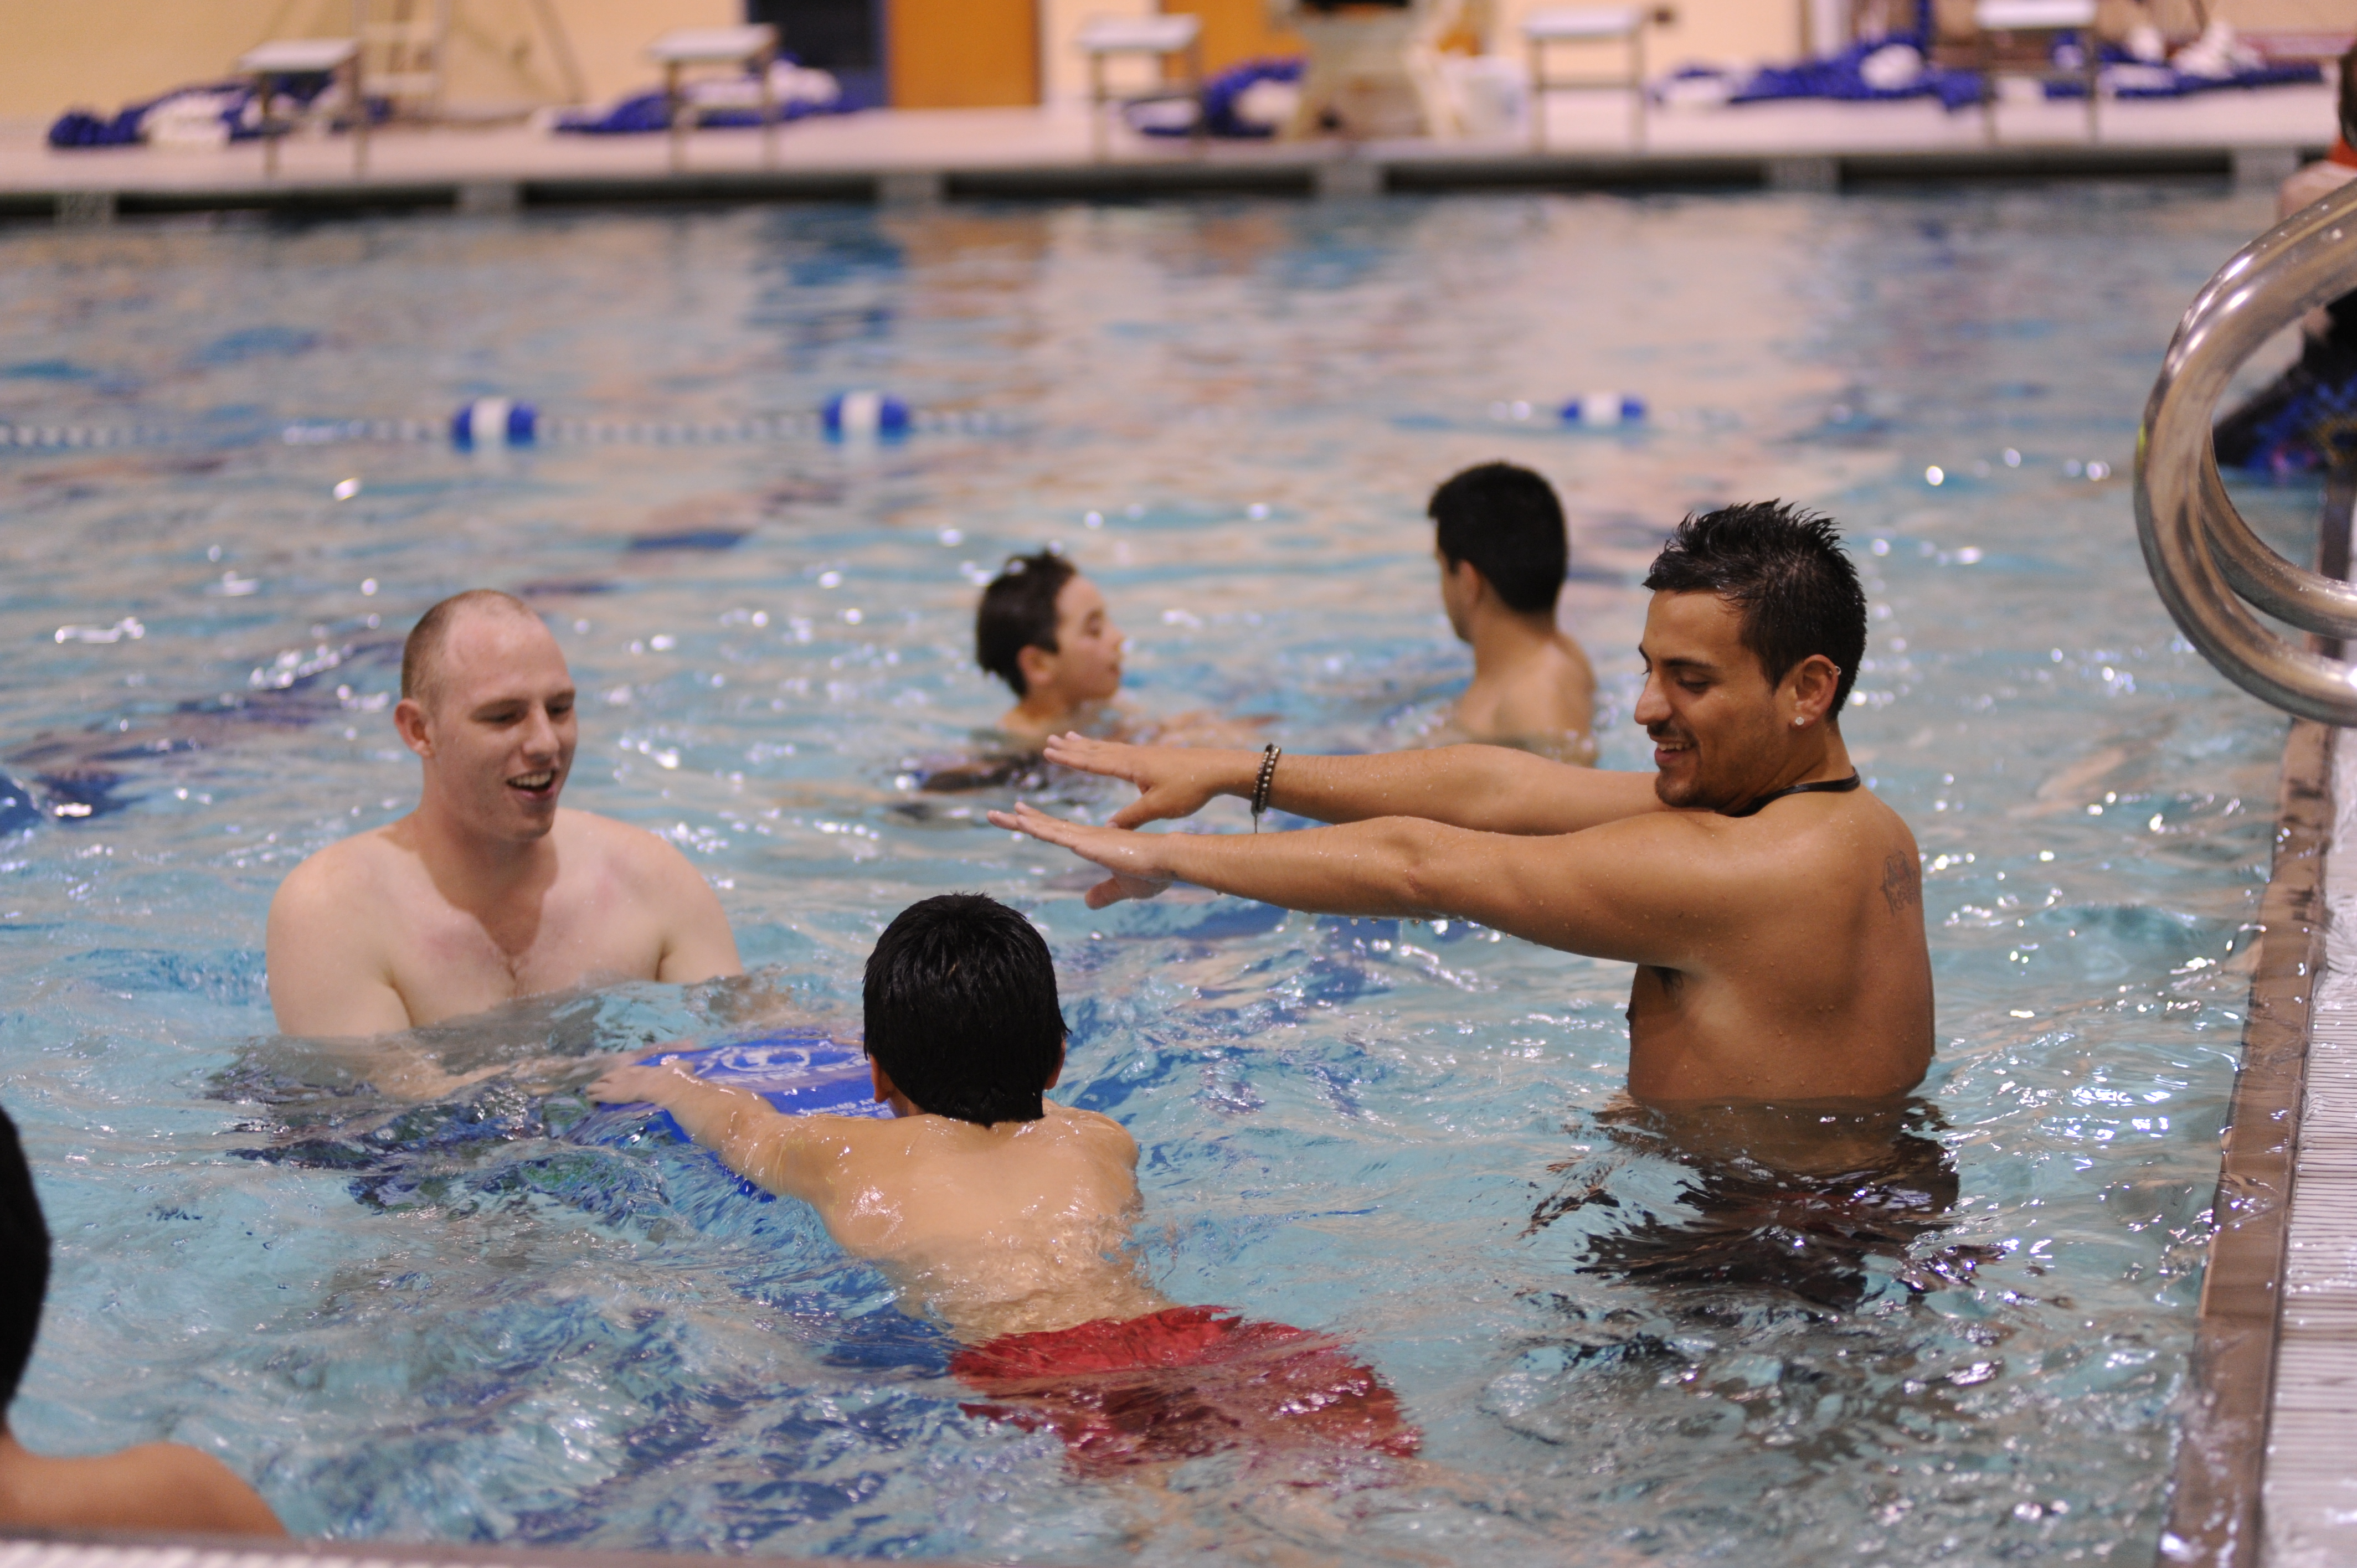 Kellus Sanchez, '11, helps a child to swim at the Berea Buddies swim party at Seabury Center pool on March 8, 2011.